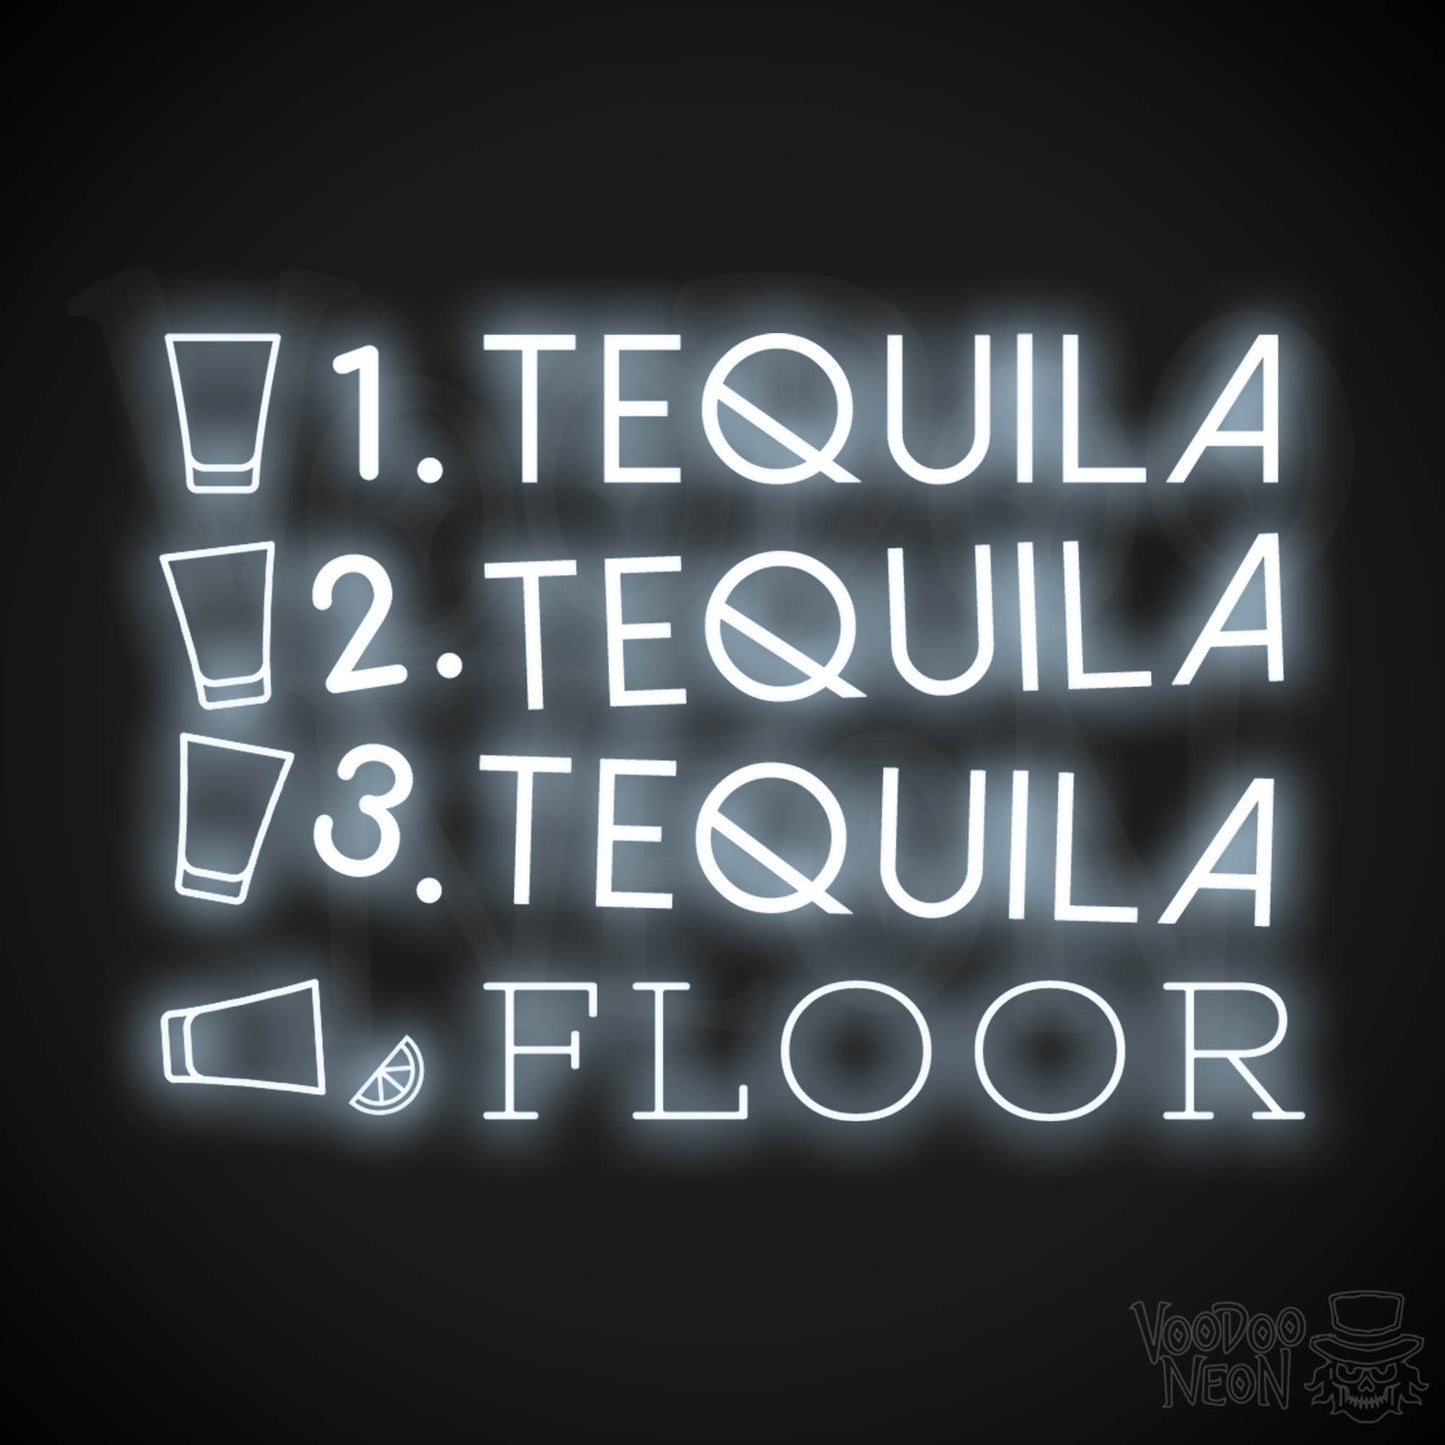 One Tequila Two Tequila Three Tequila Floor Neon sign - Neon Wall Art - Color Cool White